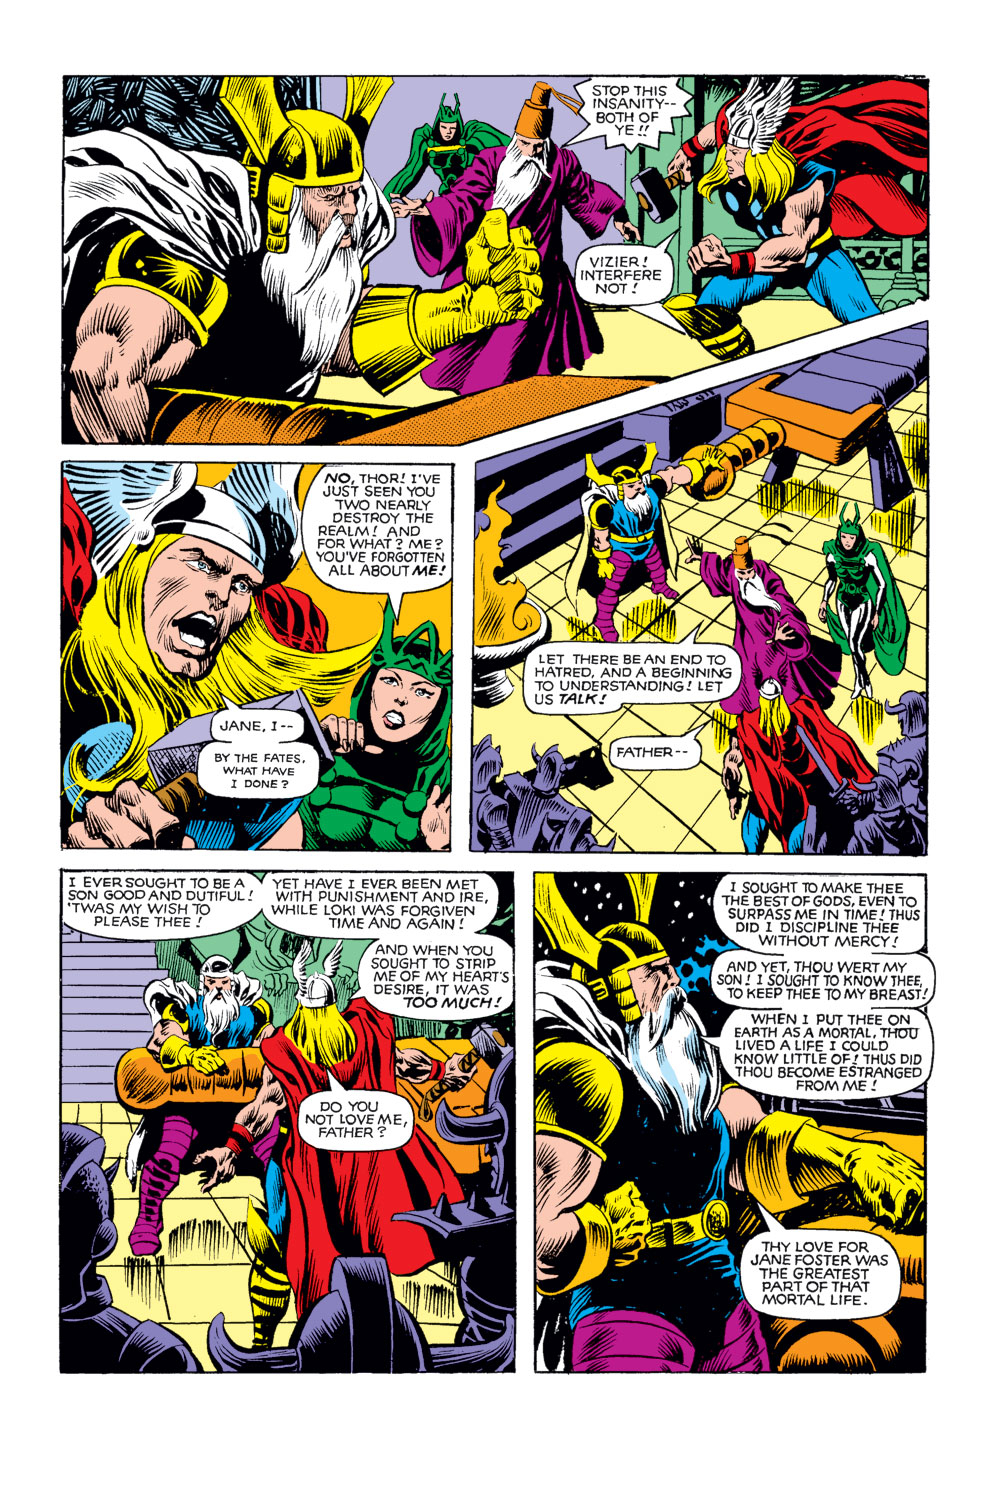 What If? (1977) issue 25 - Thor and the Avengers battled the gods - Page 31